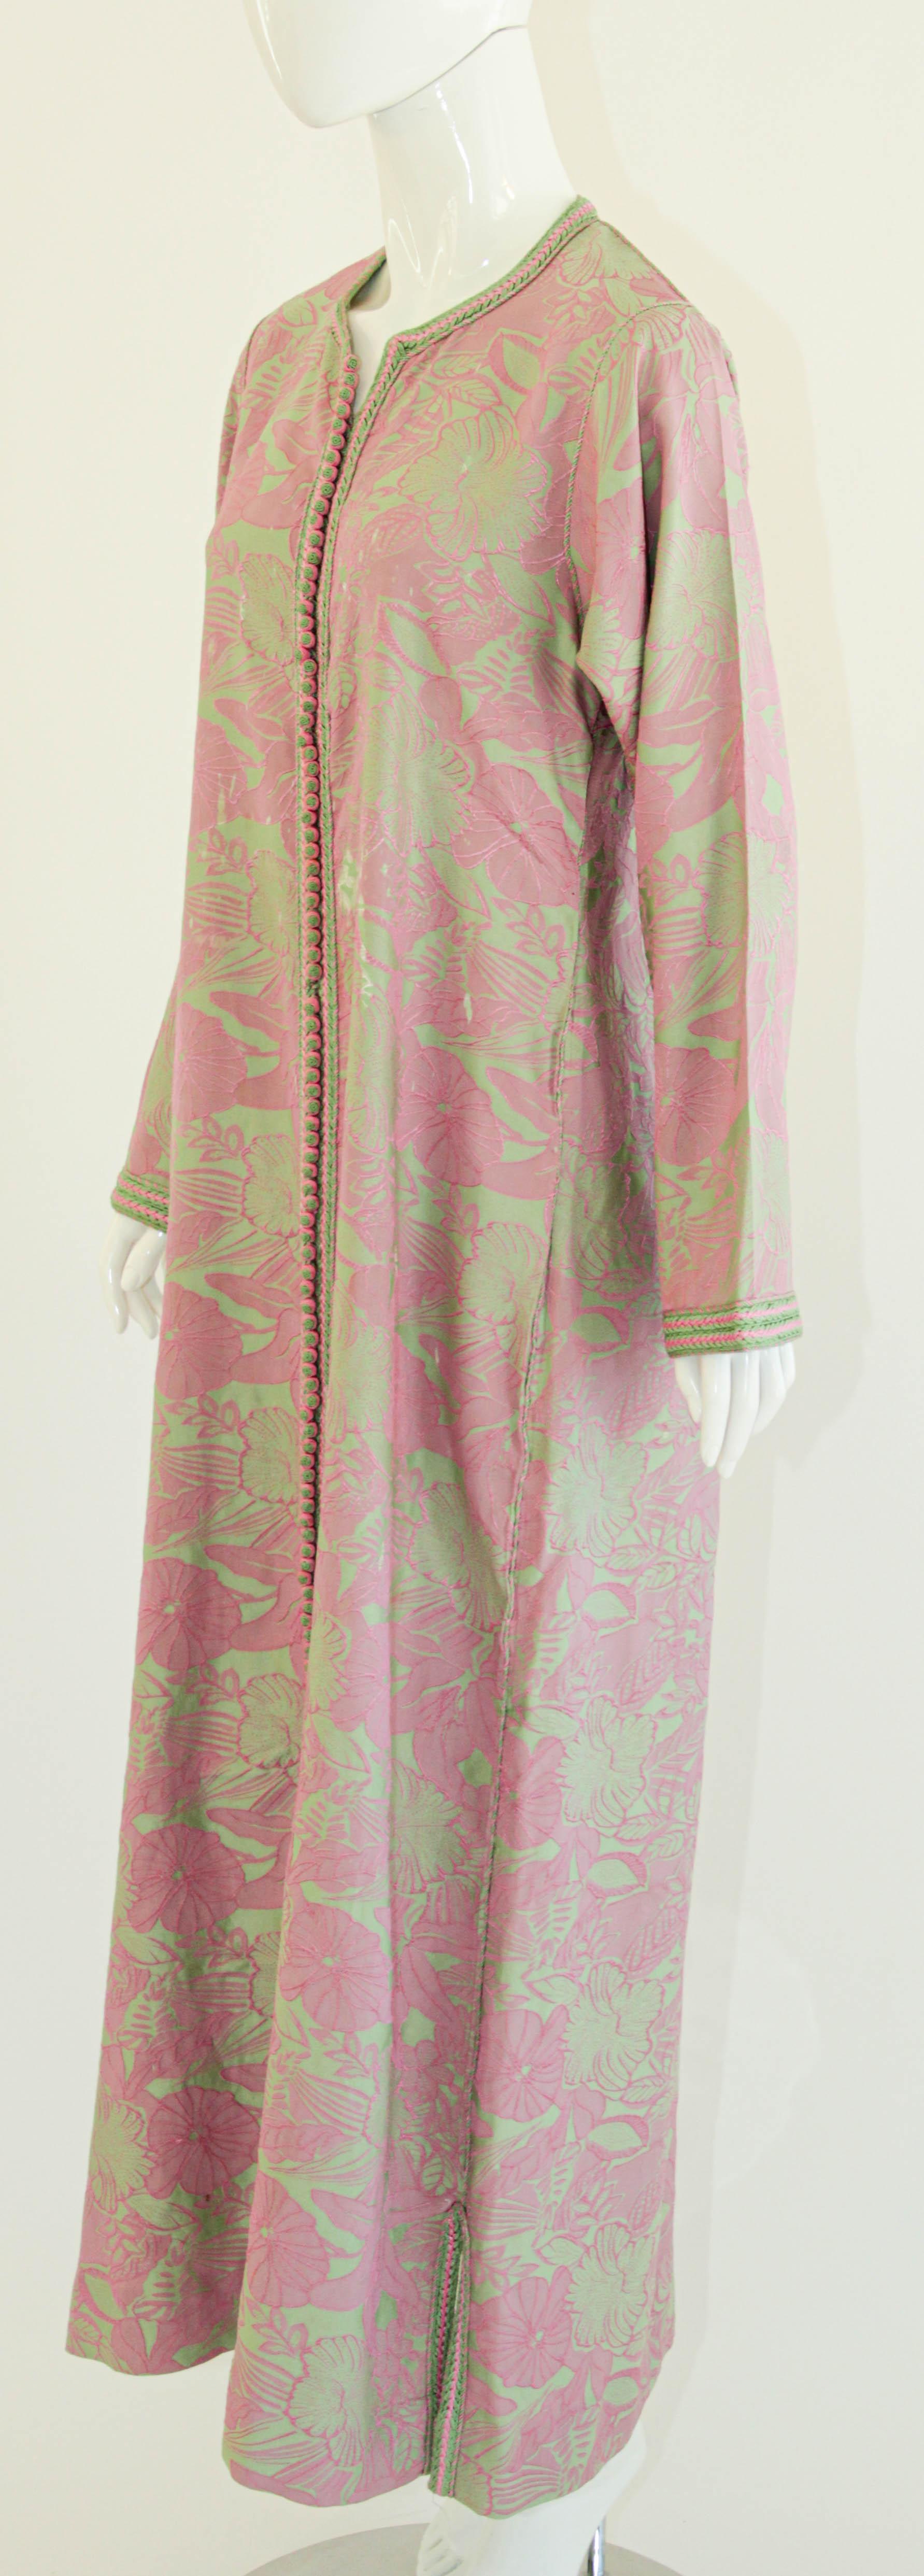 Moroccan Vintage Caftan Pink and Green Trim For Sale 8